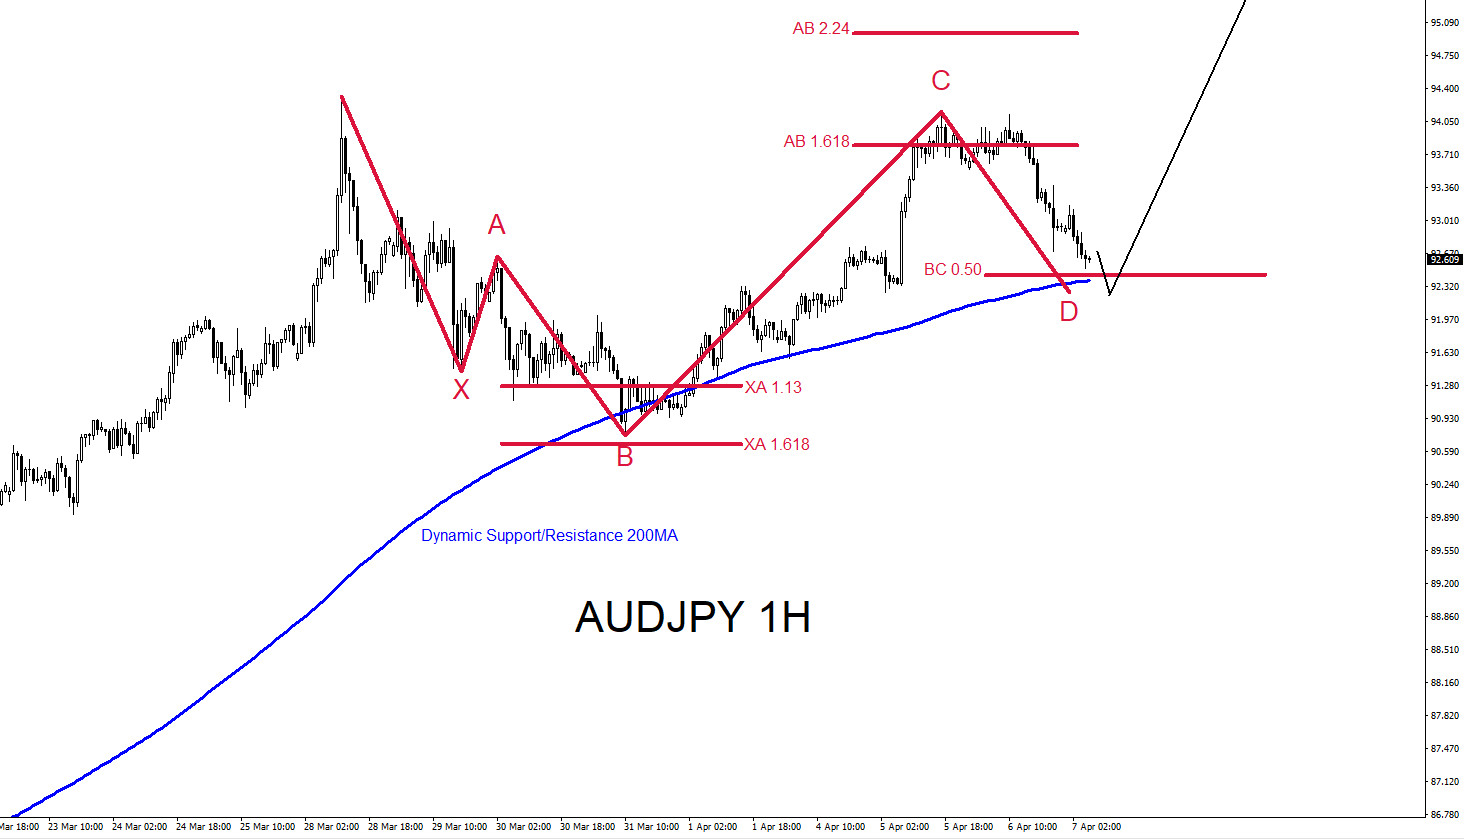 AUDJPY : Market Patterns Signalled the Move Higher